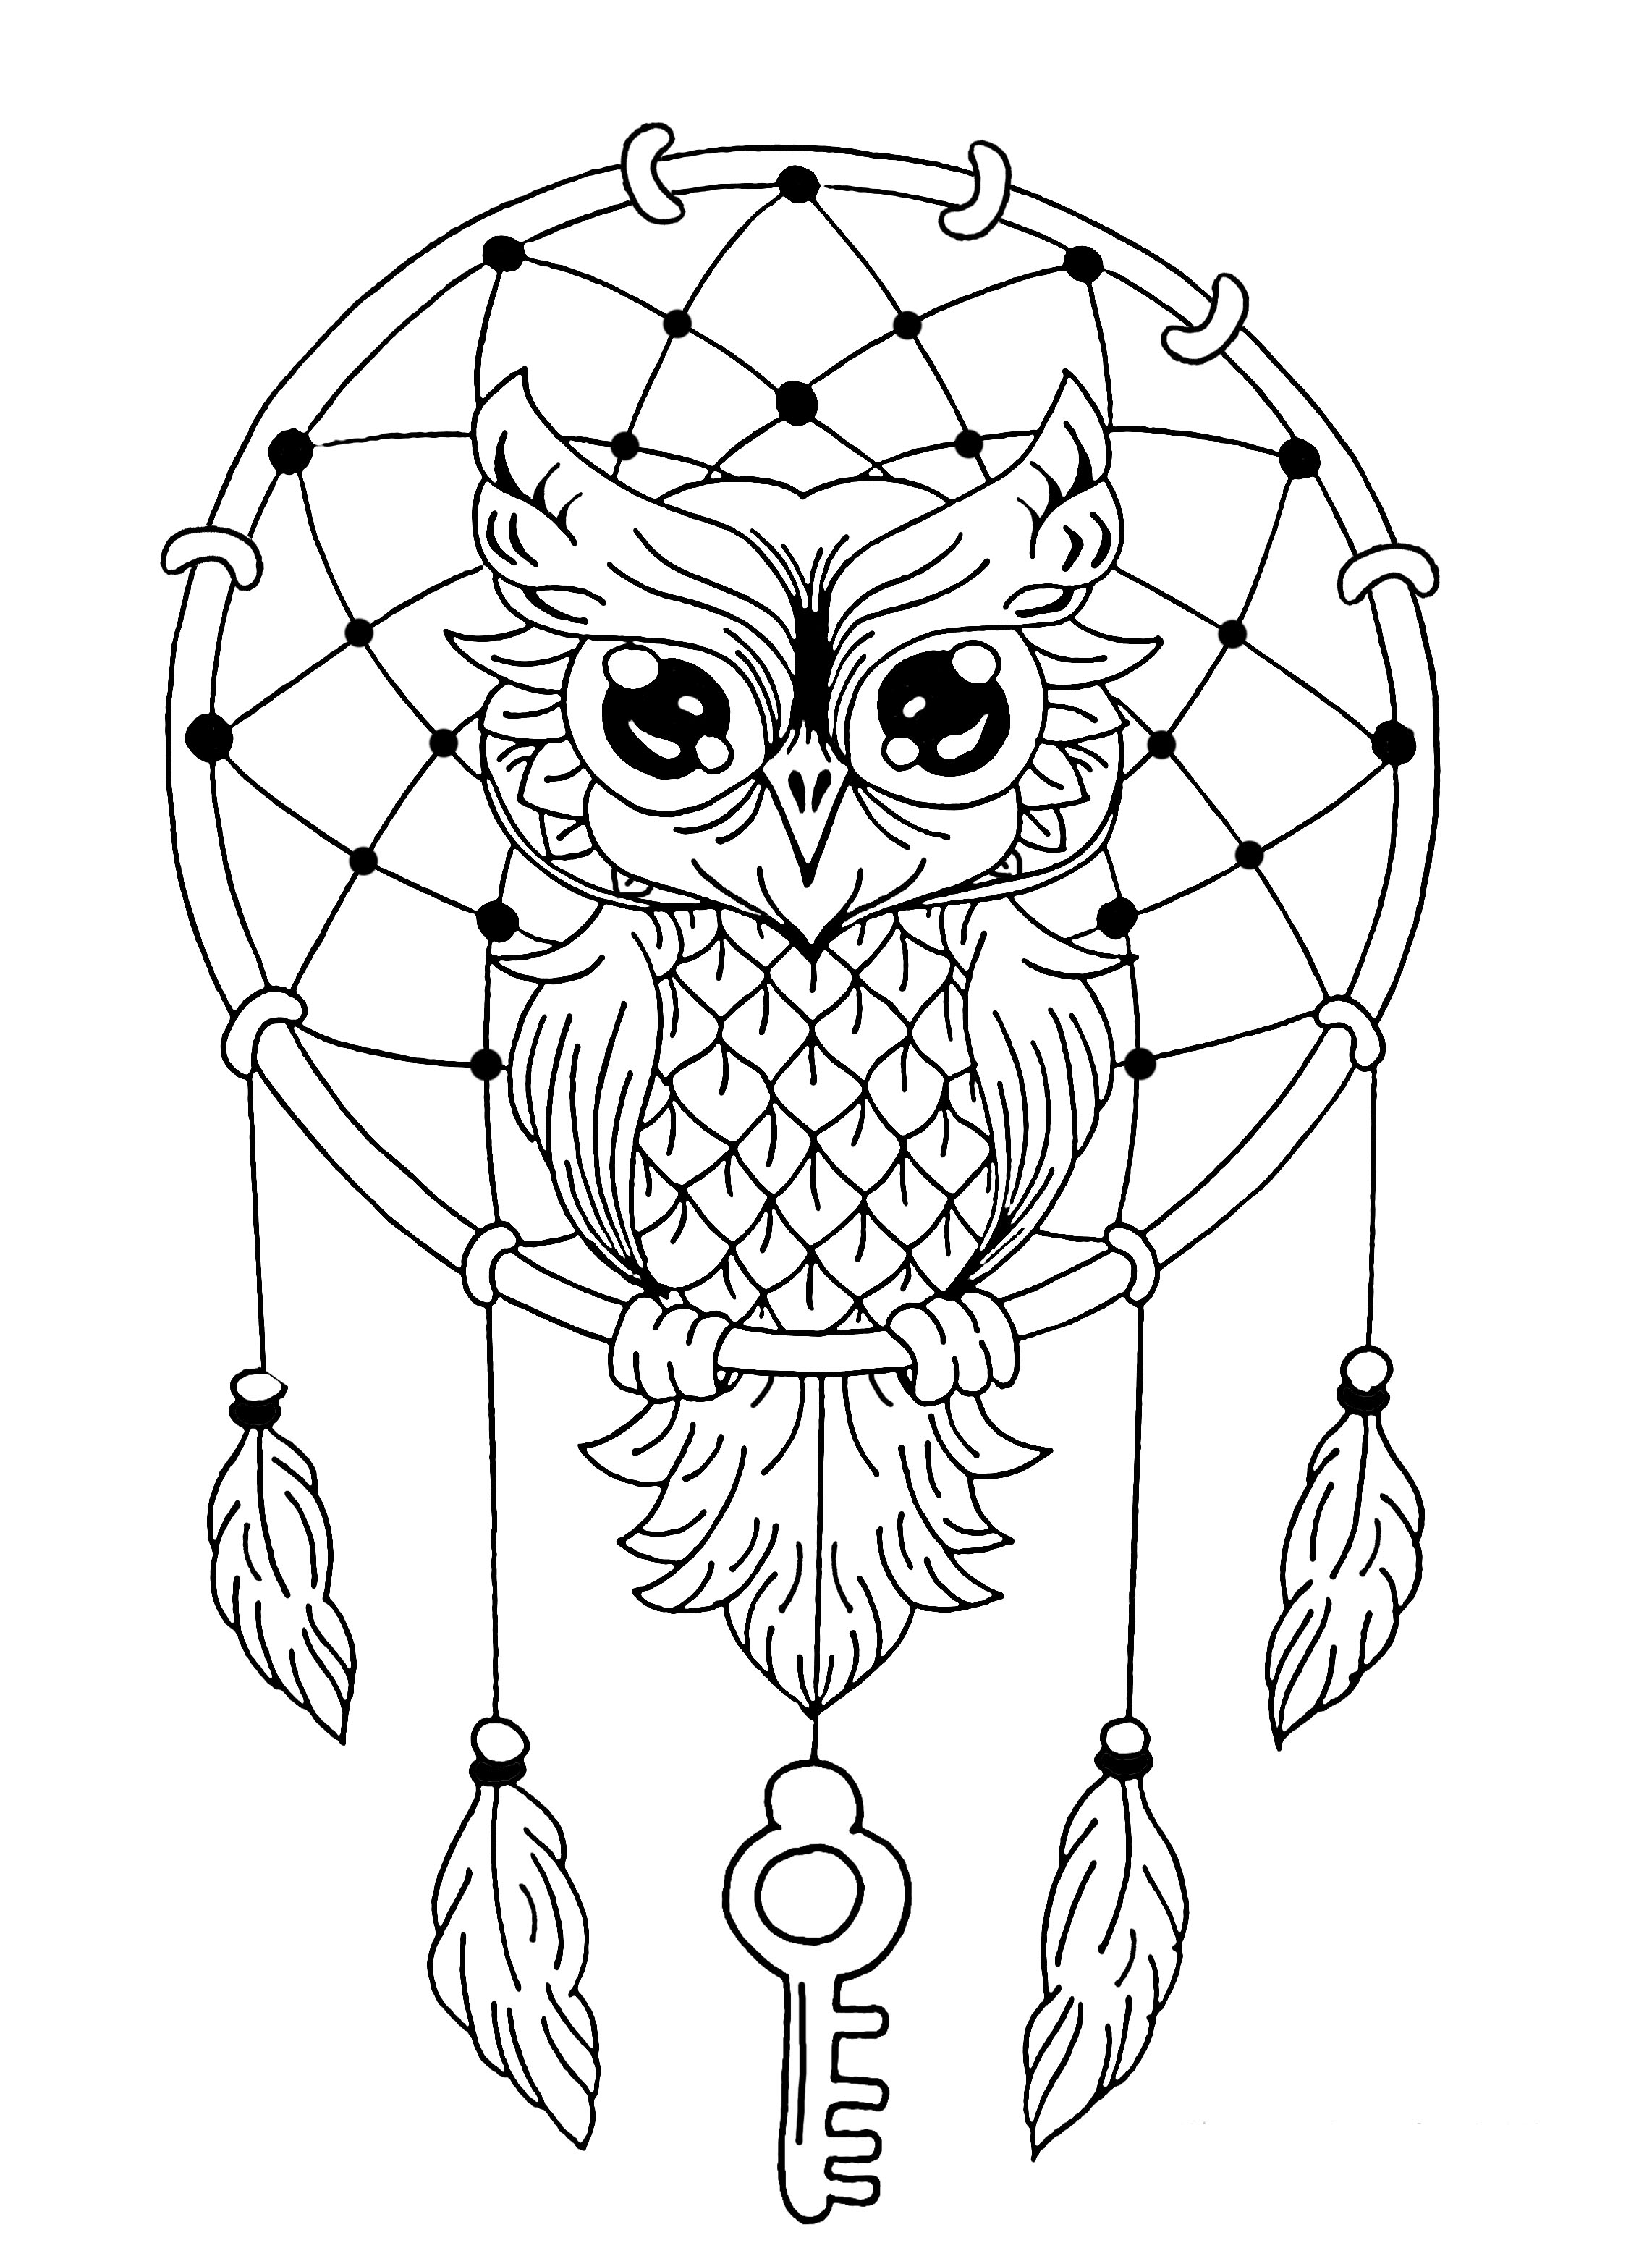 Owls for kids - Owls Kids Coloring Pages